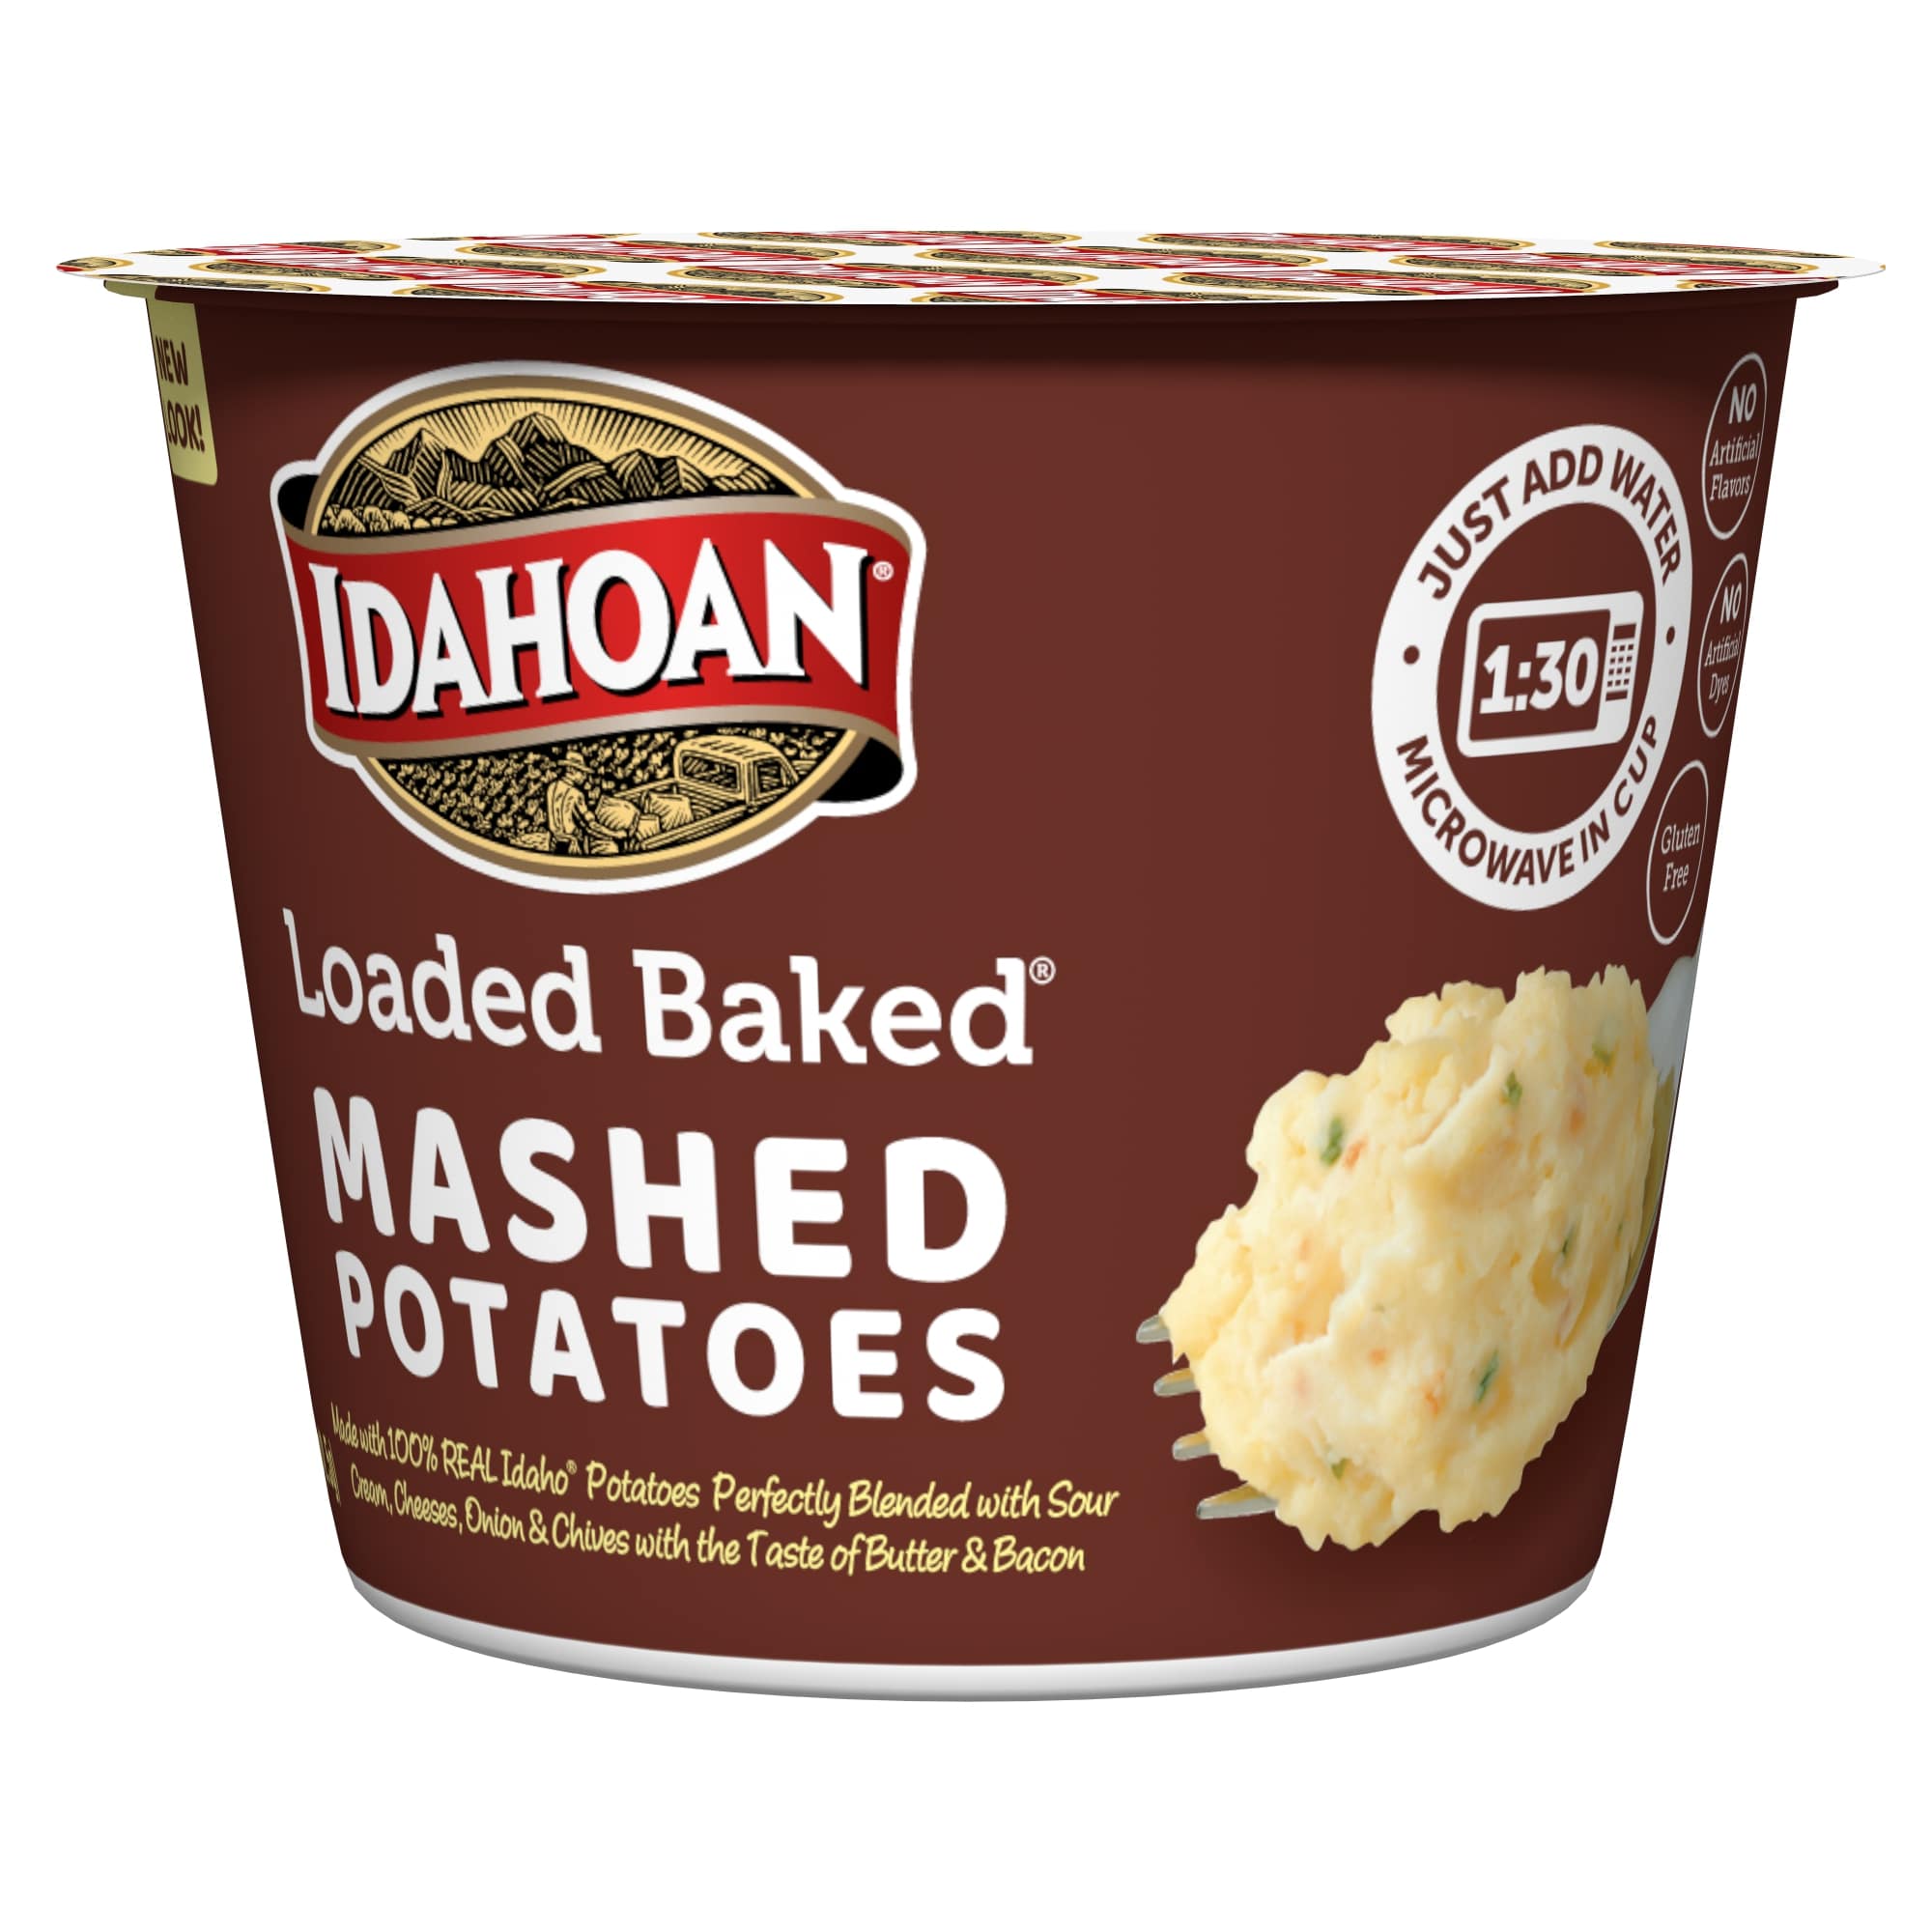 Idahoan Loaded Baked Mashed Potatoes Cup, 1.5 Ounce -- 10 per case.